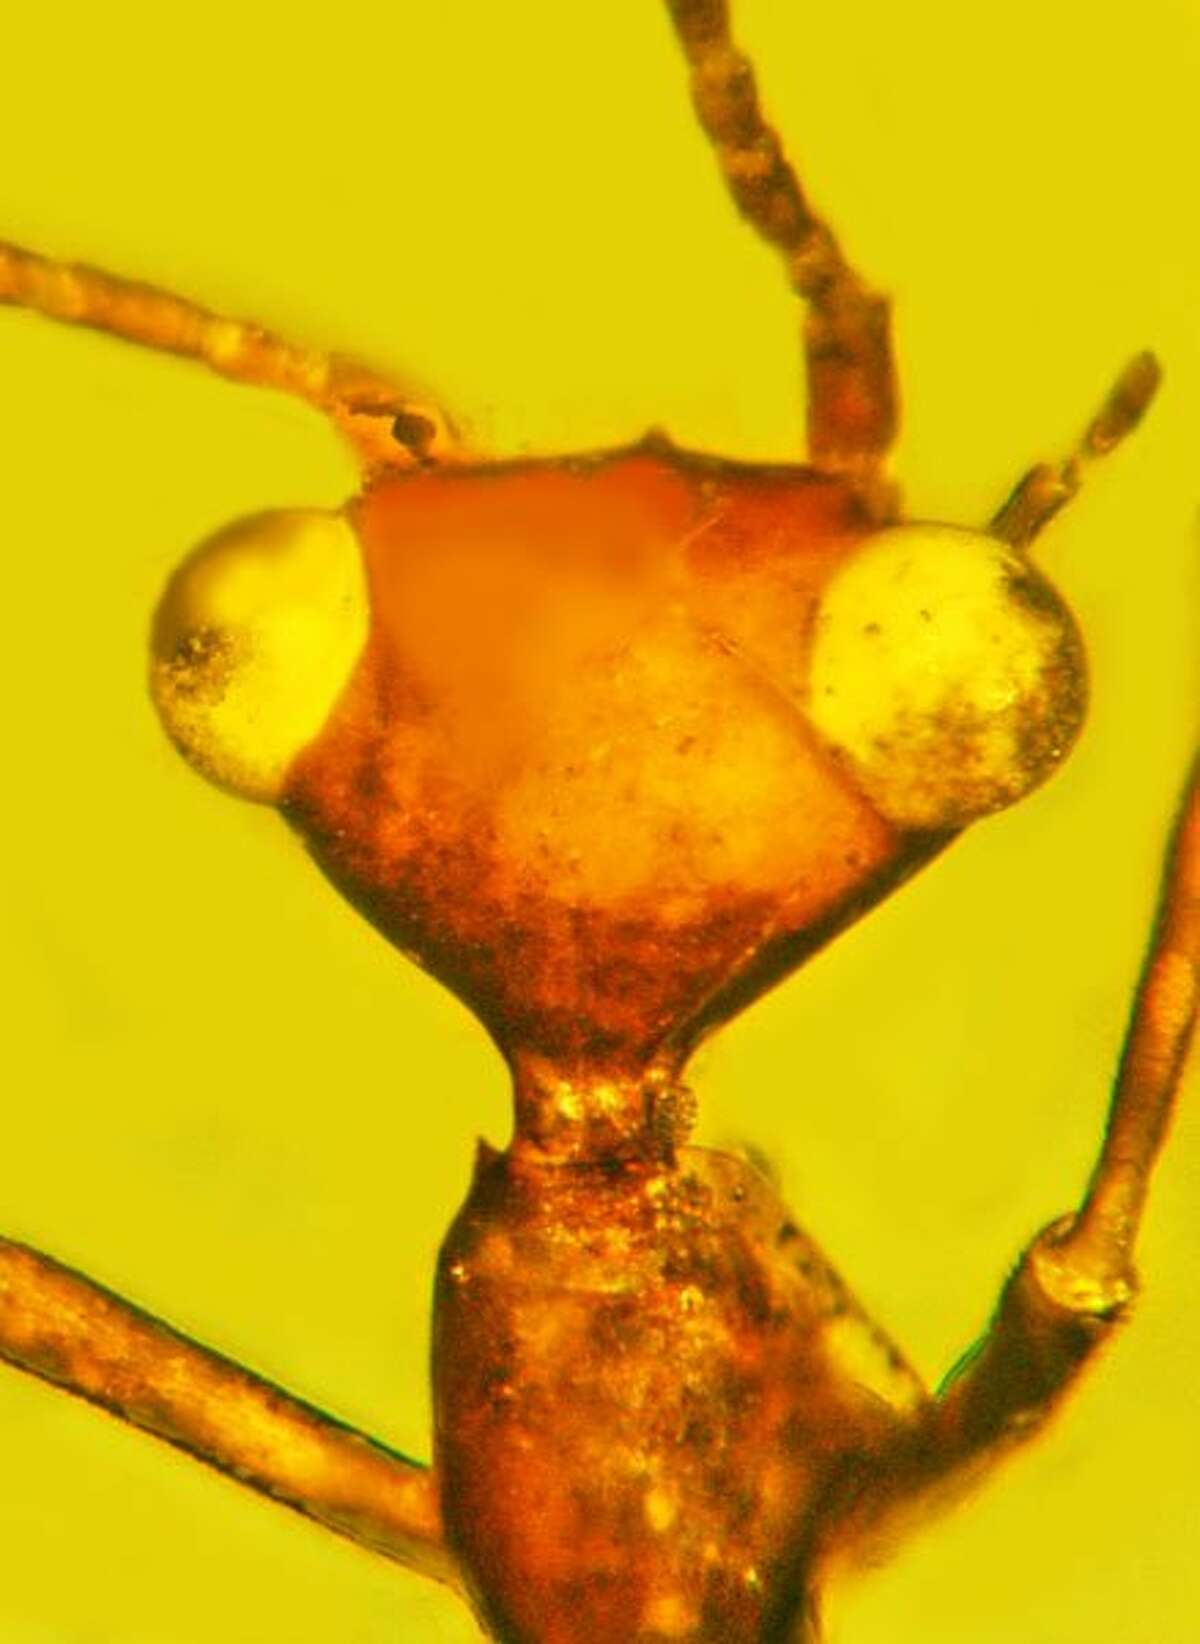 A mystery insect trapped in amber for 100 million years has caught the interest of scientists and the California Academy of Sciences in San Francisco.